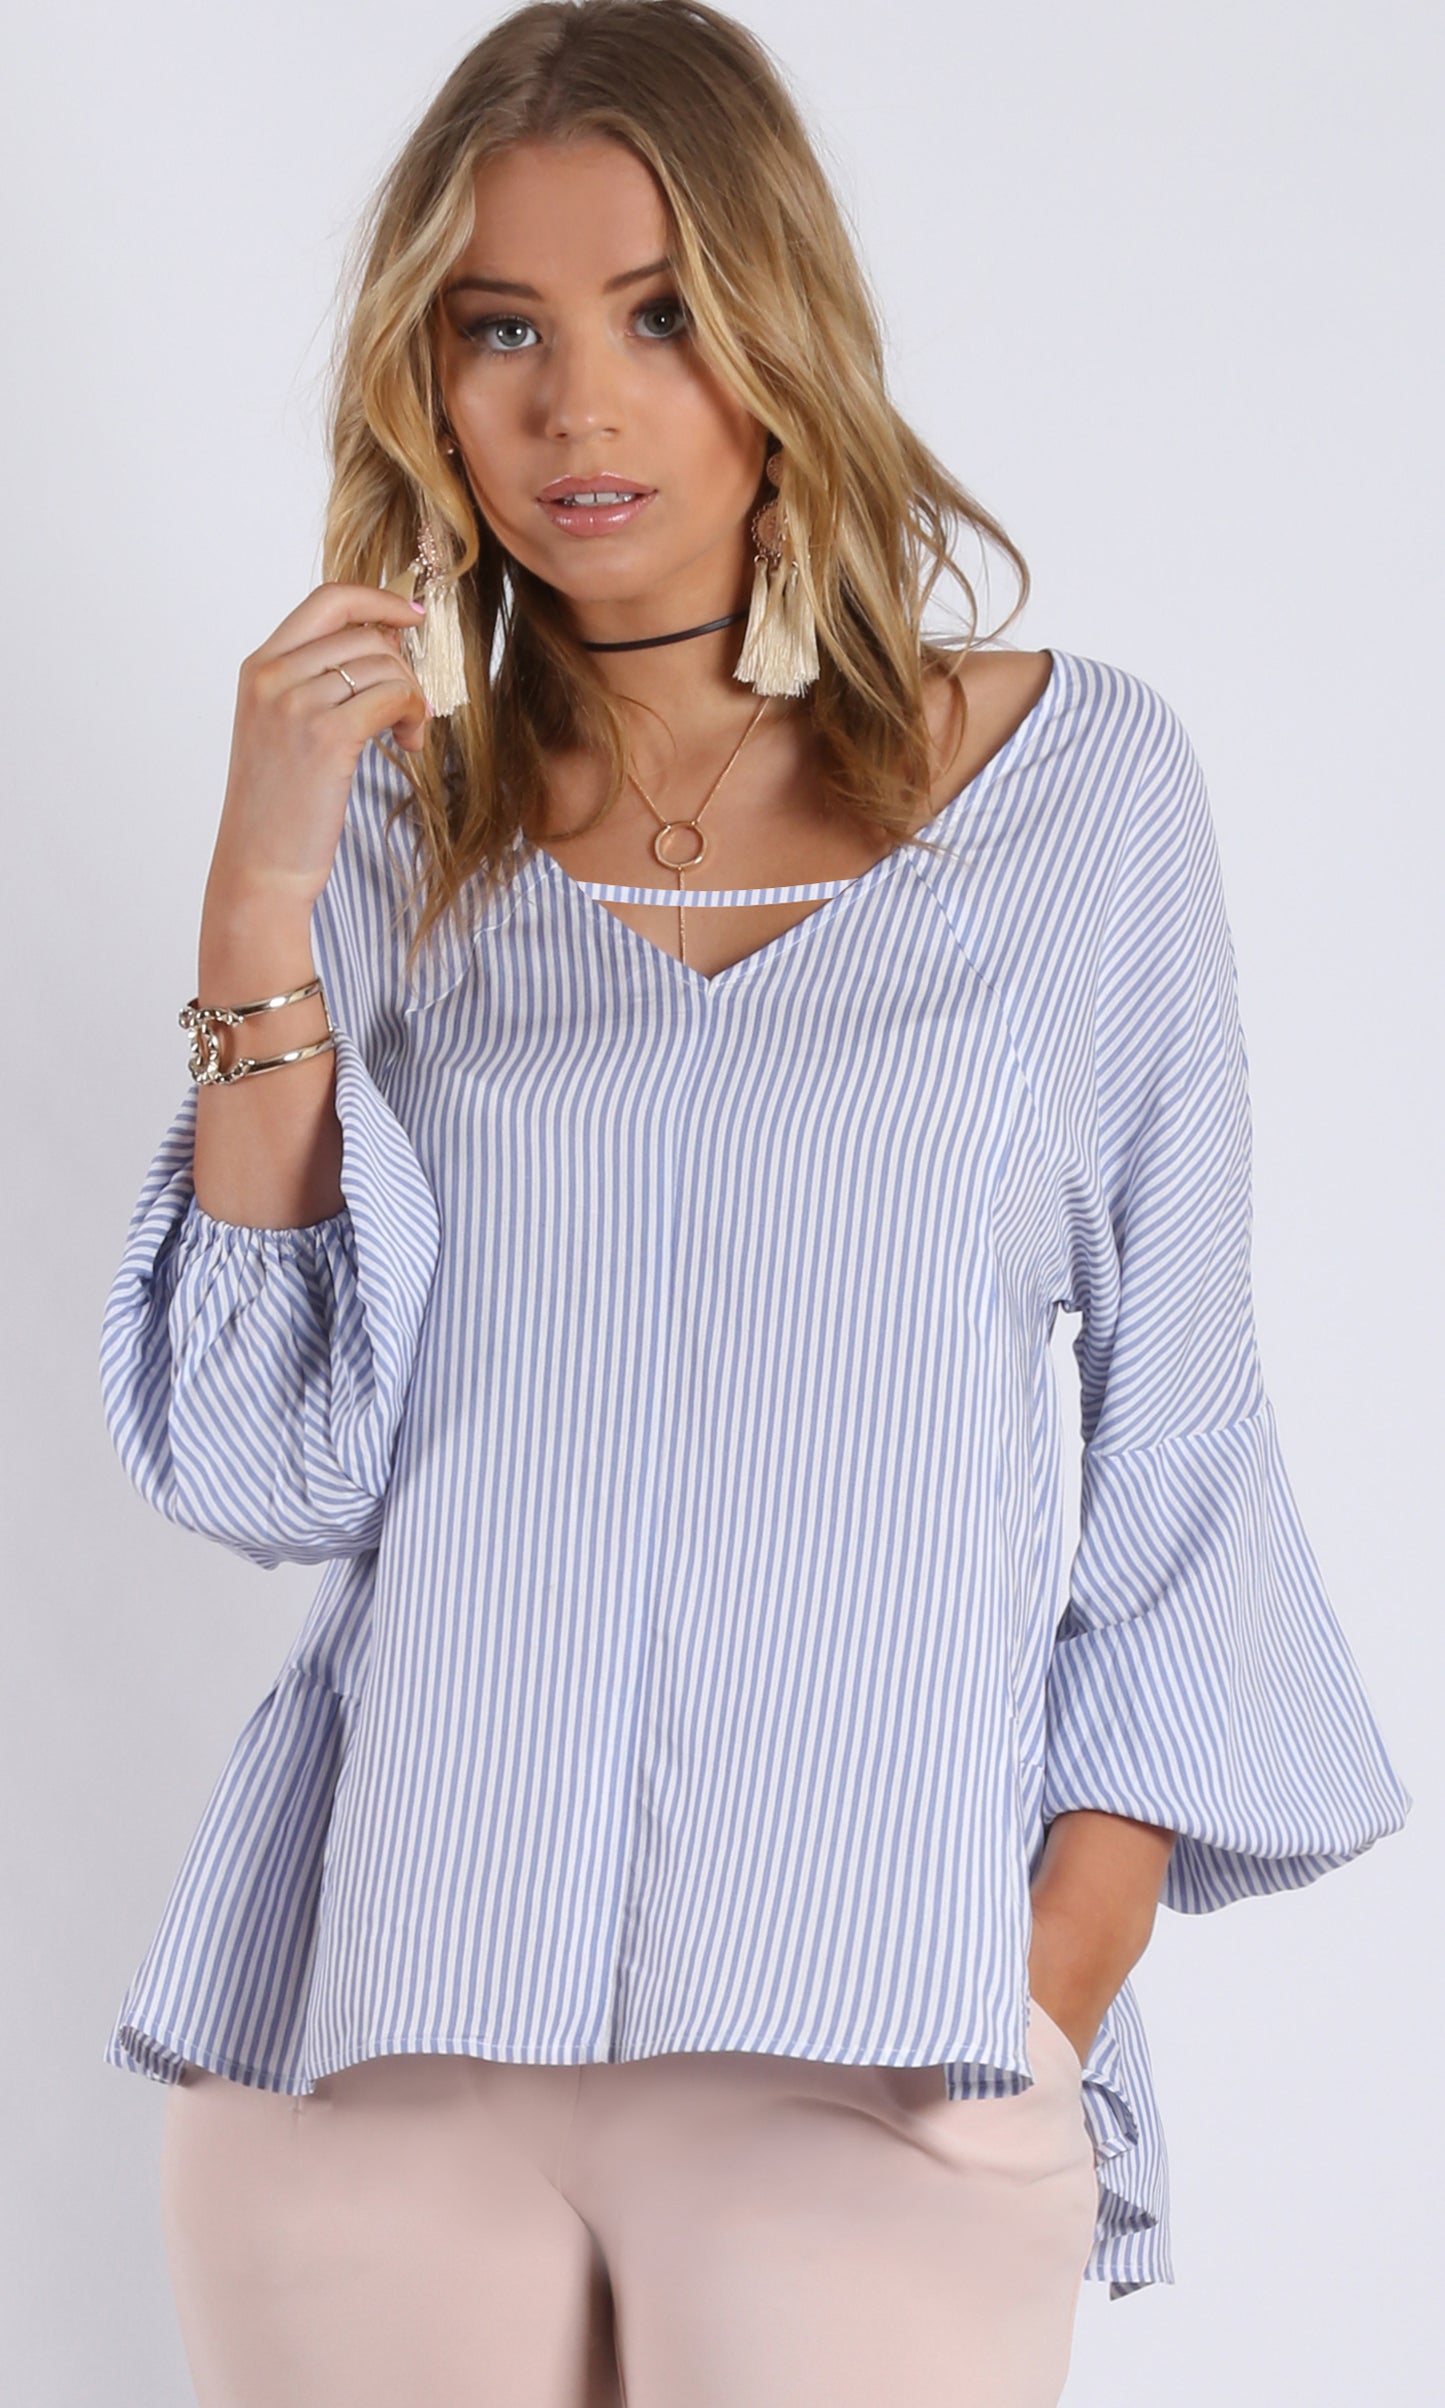 LV785-1SS Relaxed Fit V Neck Top (Pack)